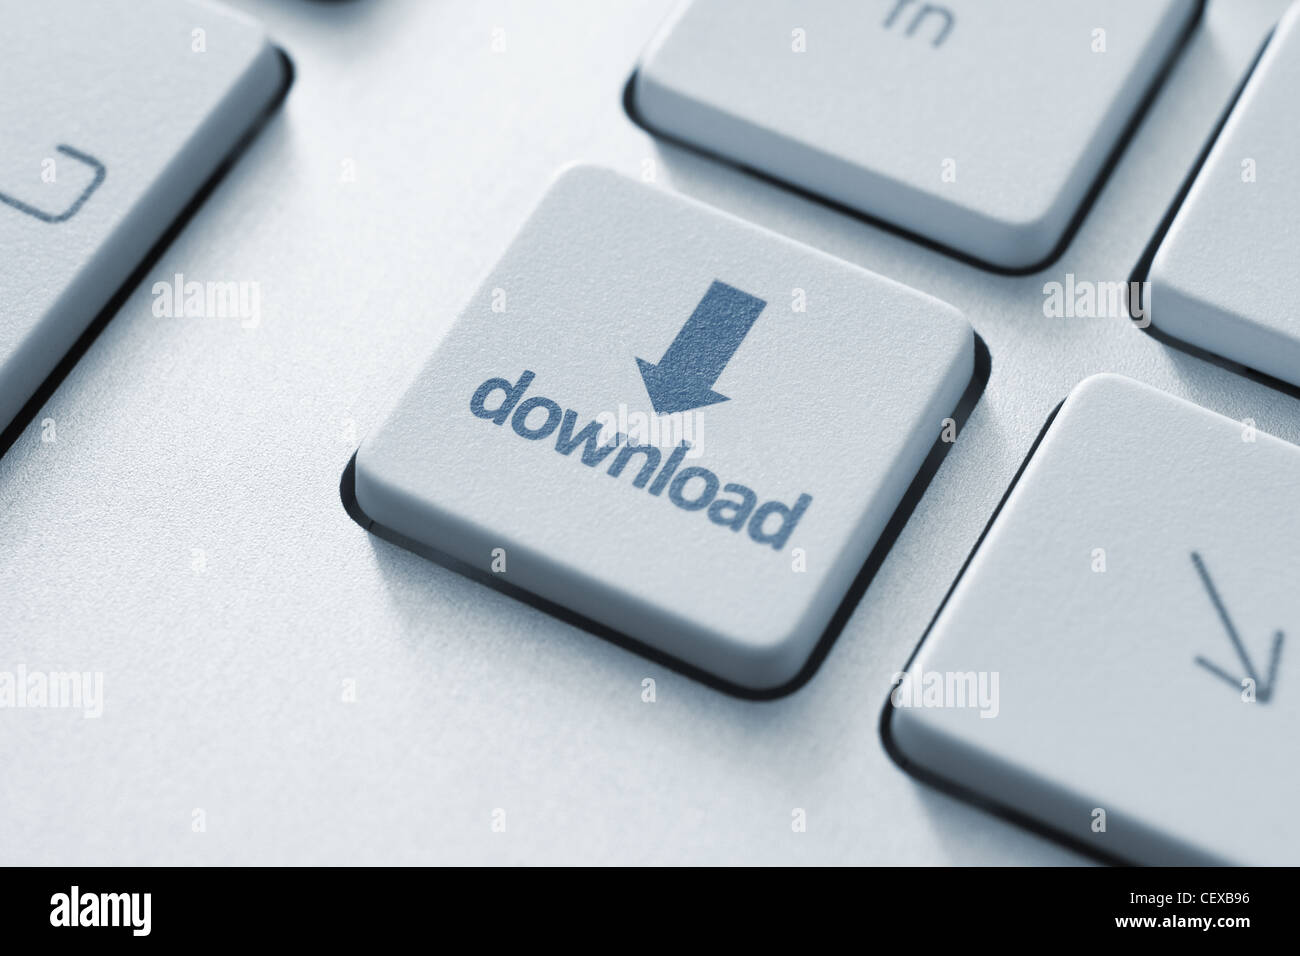 Download button on the keyboard. Toned Image. Stock Photo